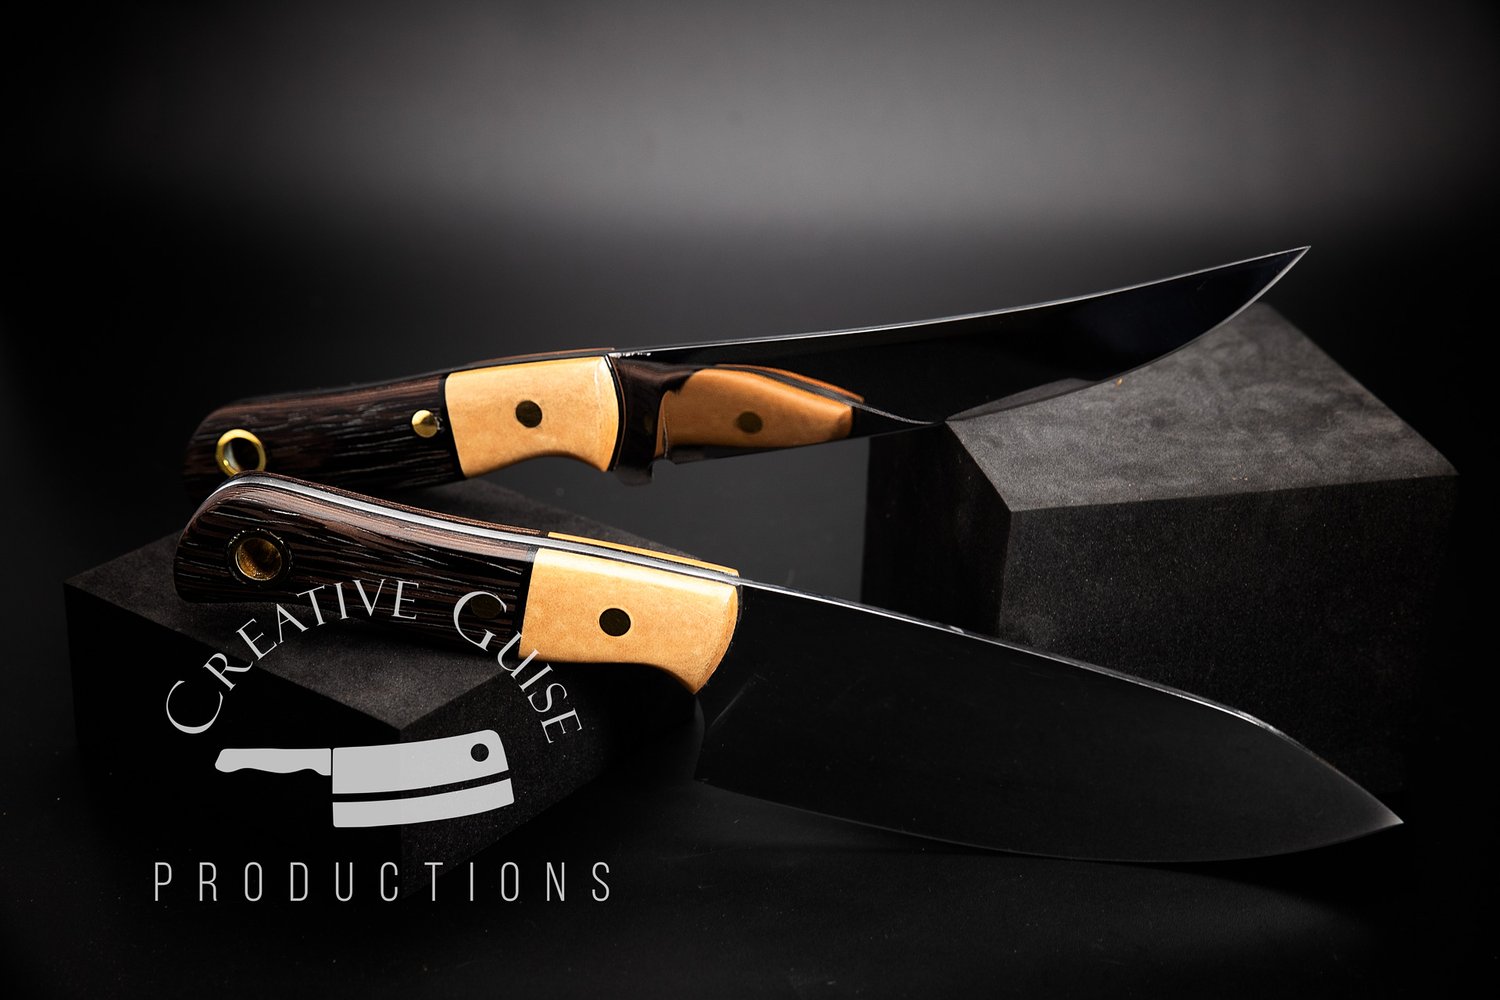 Two Piece Kitchen Knife Set Featuring an 8 Inch Chef and 6 Inch Boning Knife  Paired with Segmented Micarta Handle Scales. — Creative Guise Productions